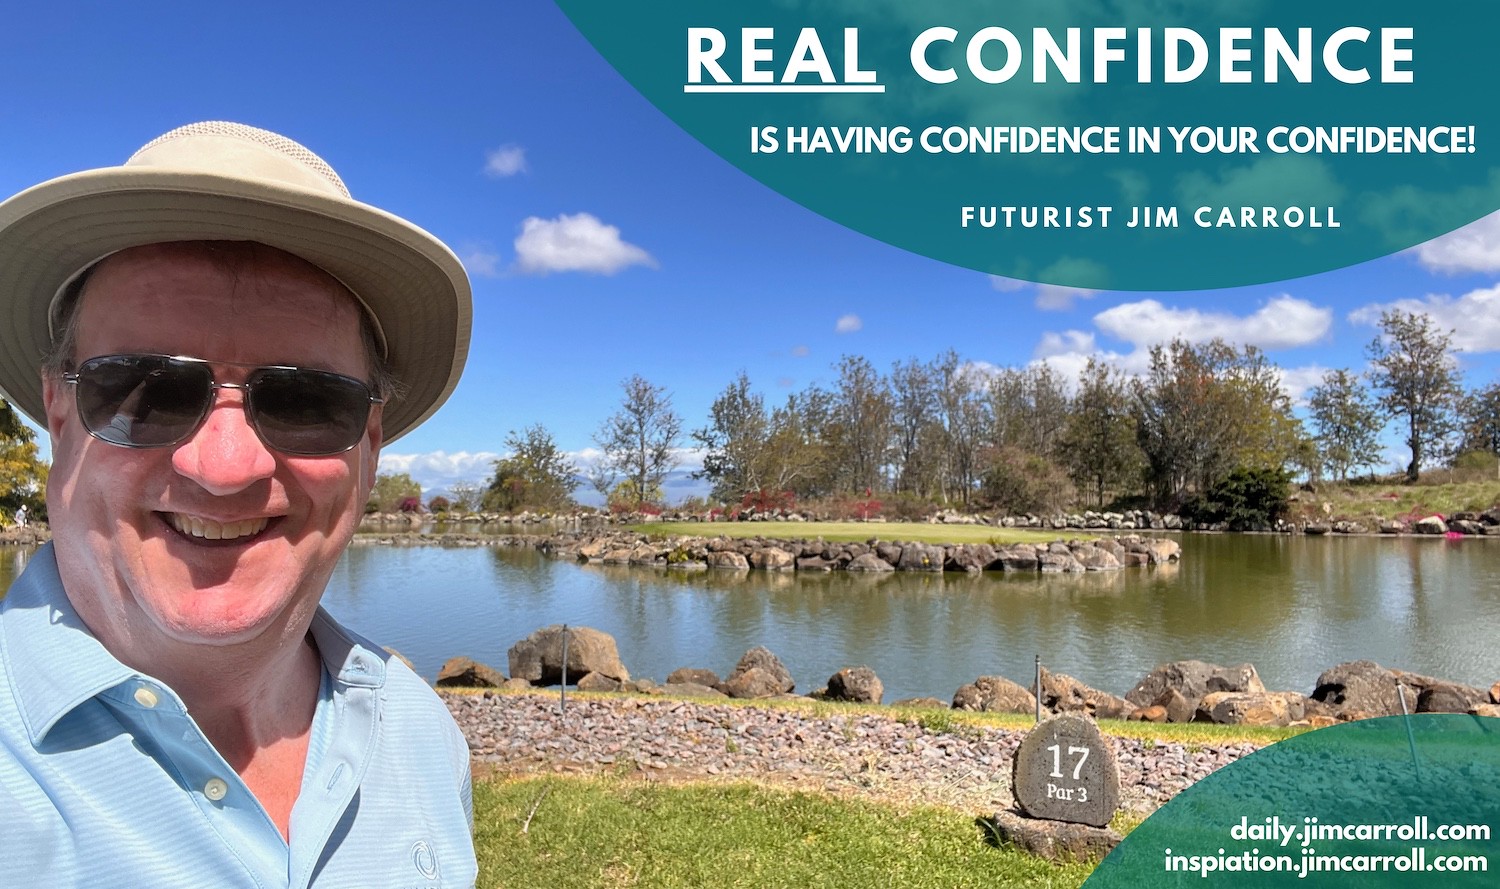 "REAL confidence is having confidence in your confidence!" - Futurist Jim Carroll